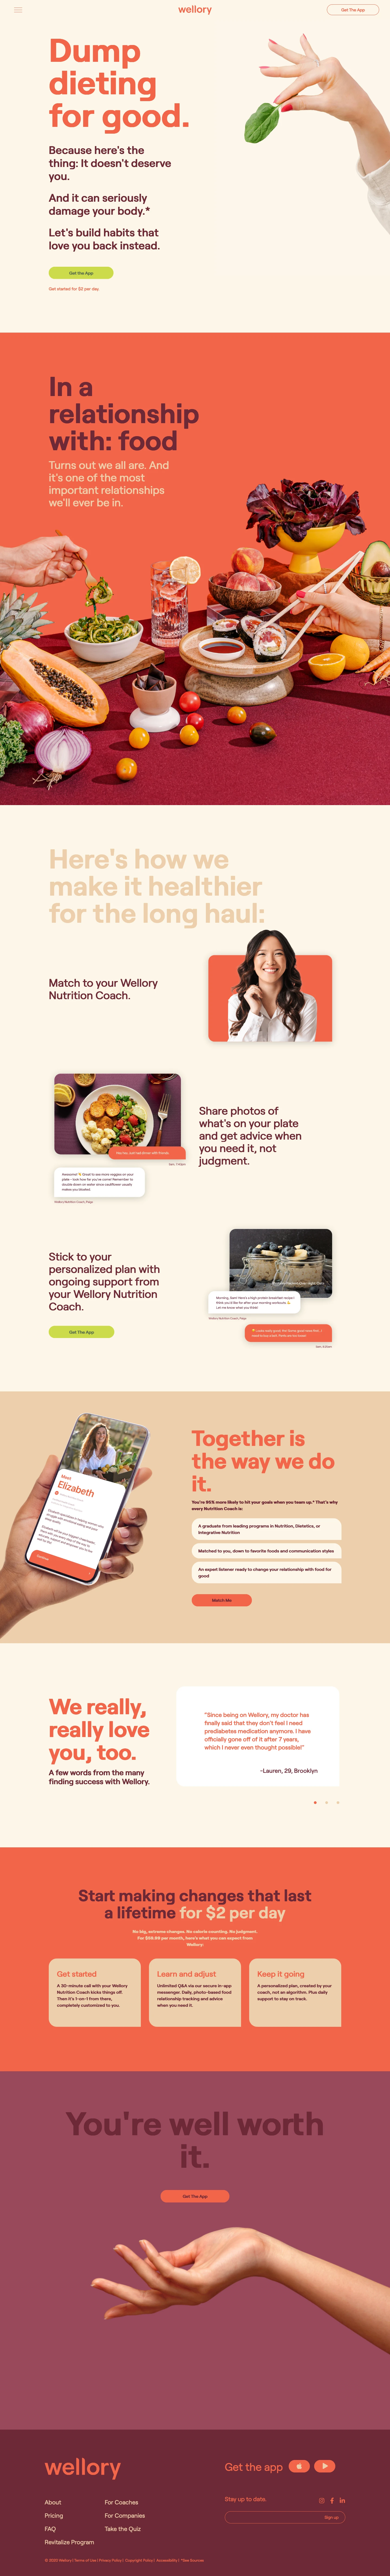 Wellory Landing Page Example: You are so not alone. Team up with a Wellory Nutritionist to change your relationship with food for good, starting today.